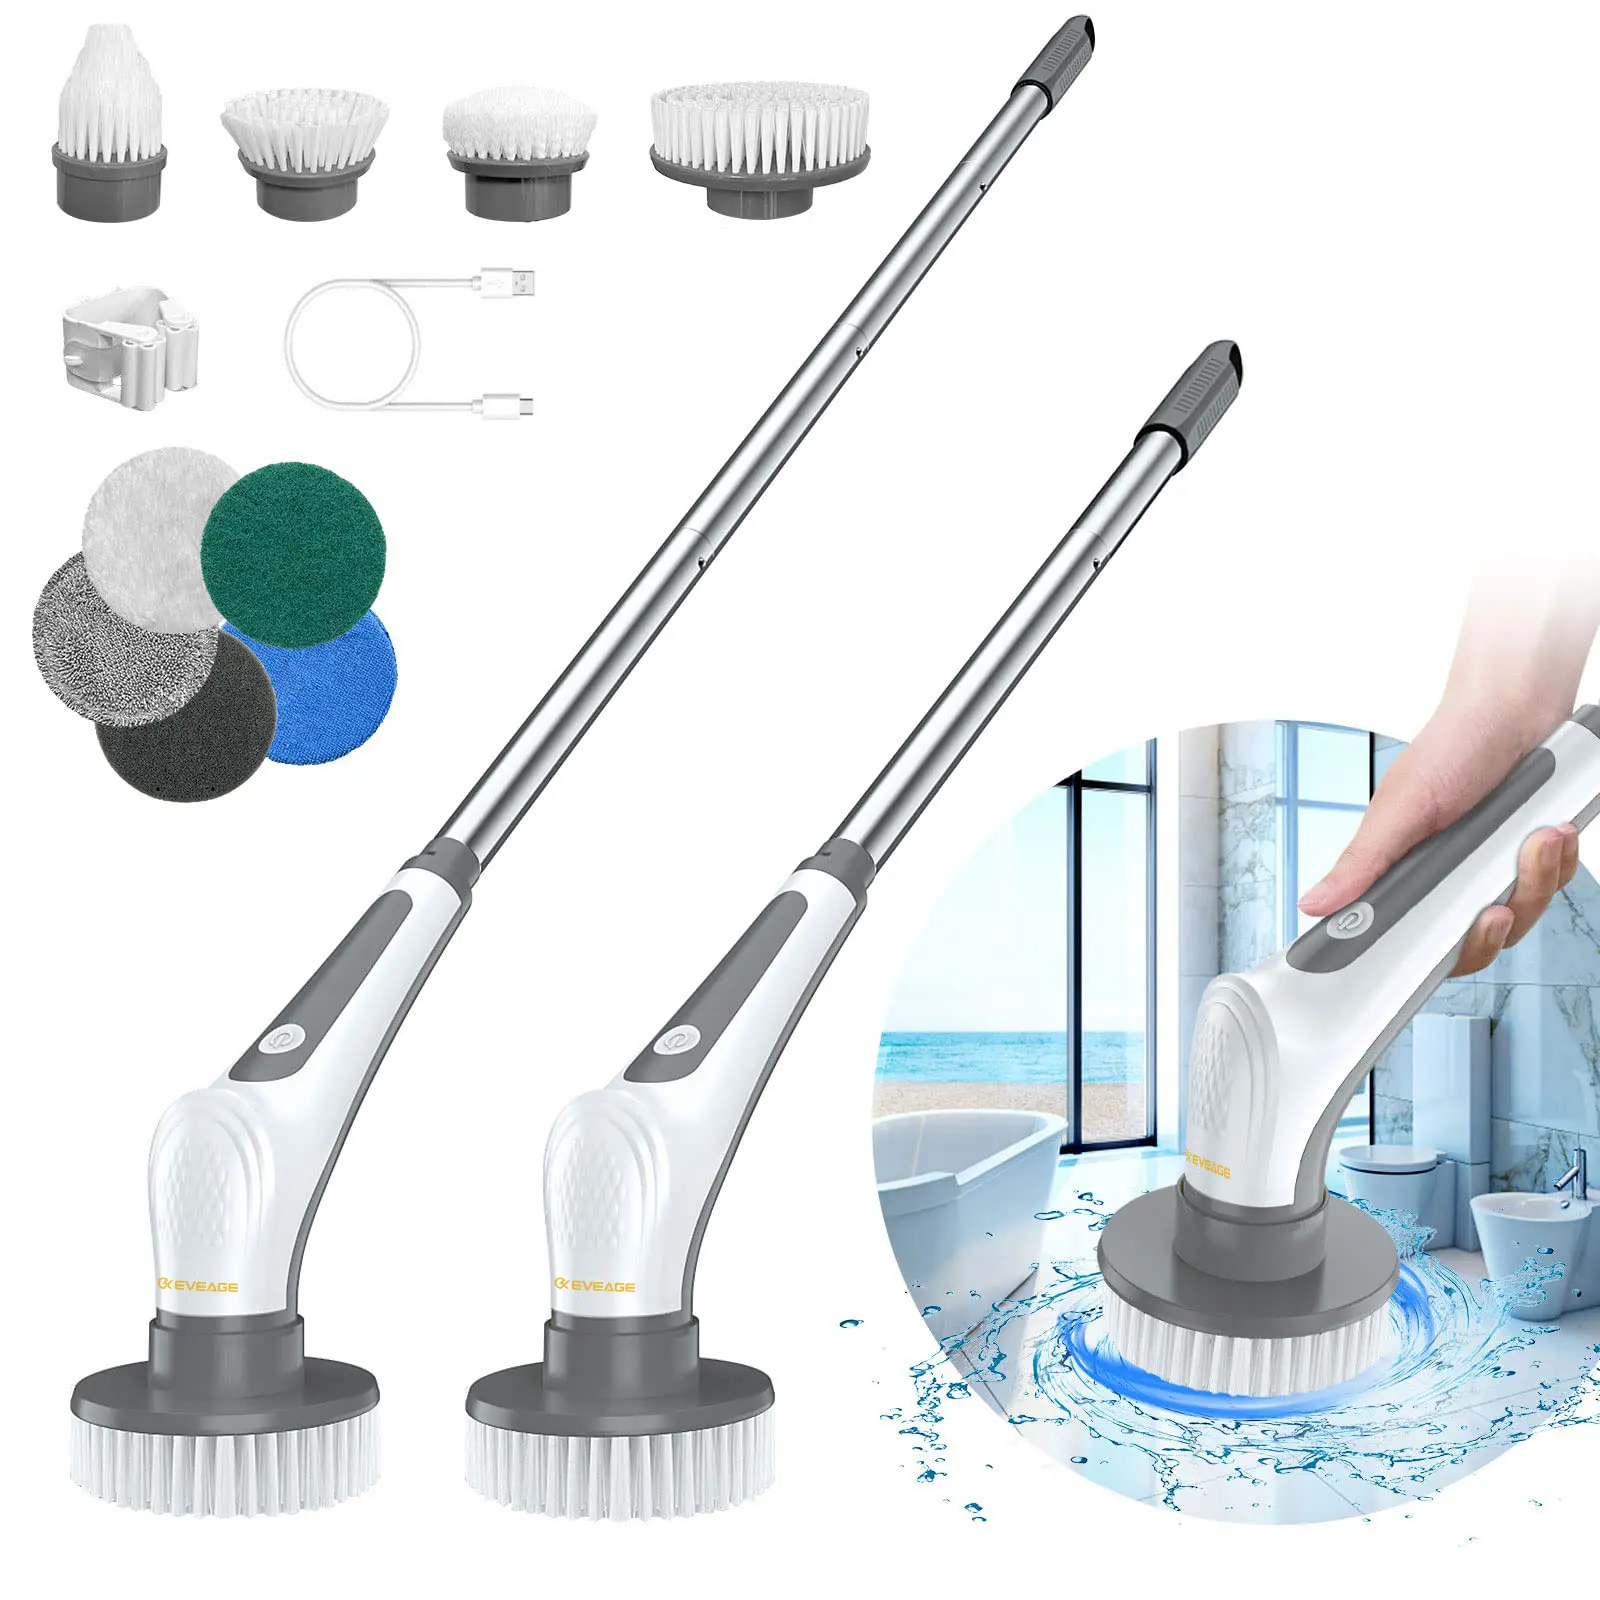 EVEAGE Electric Spin Scrubber